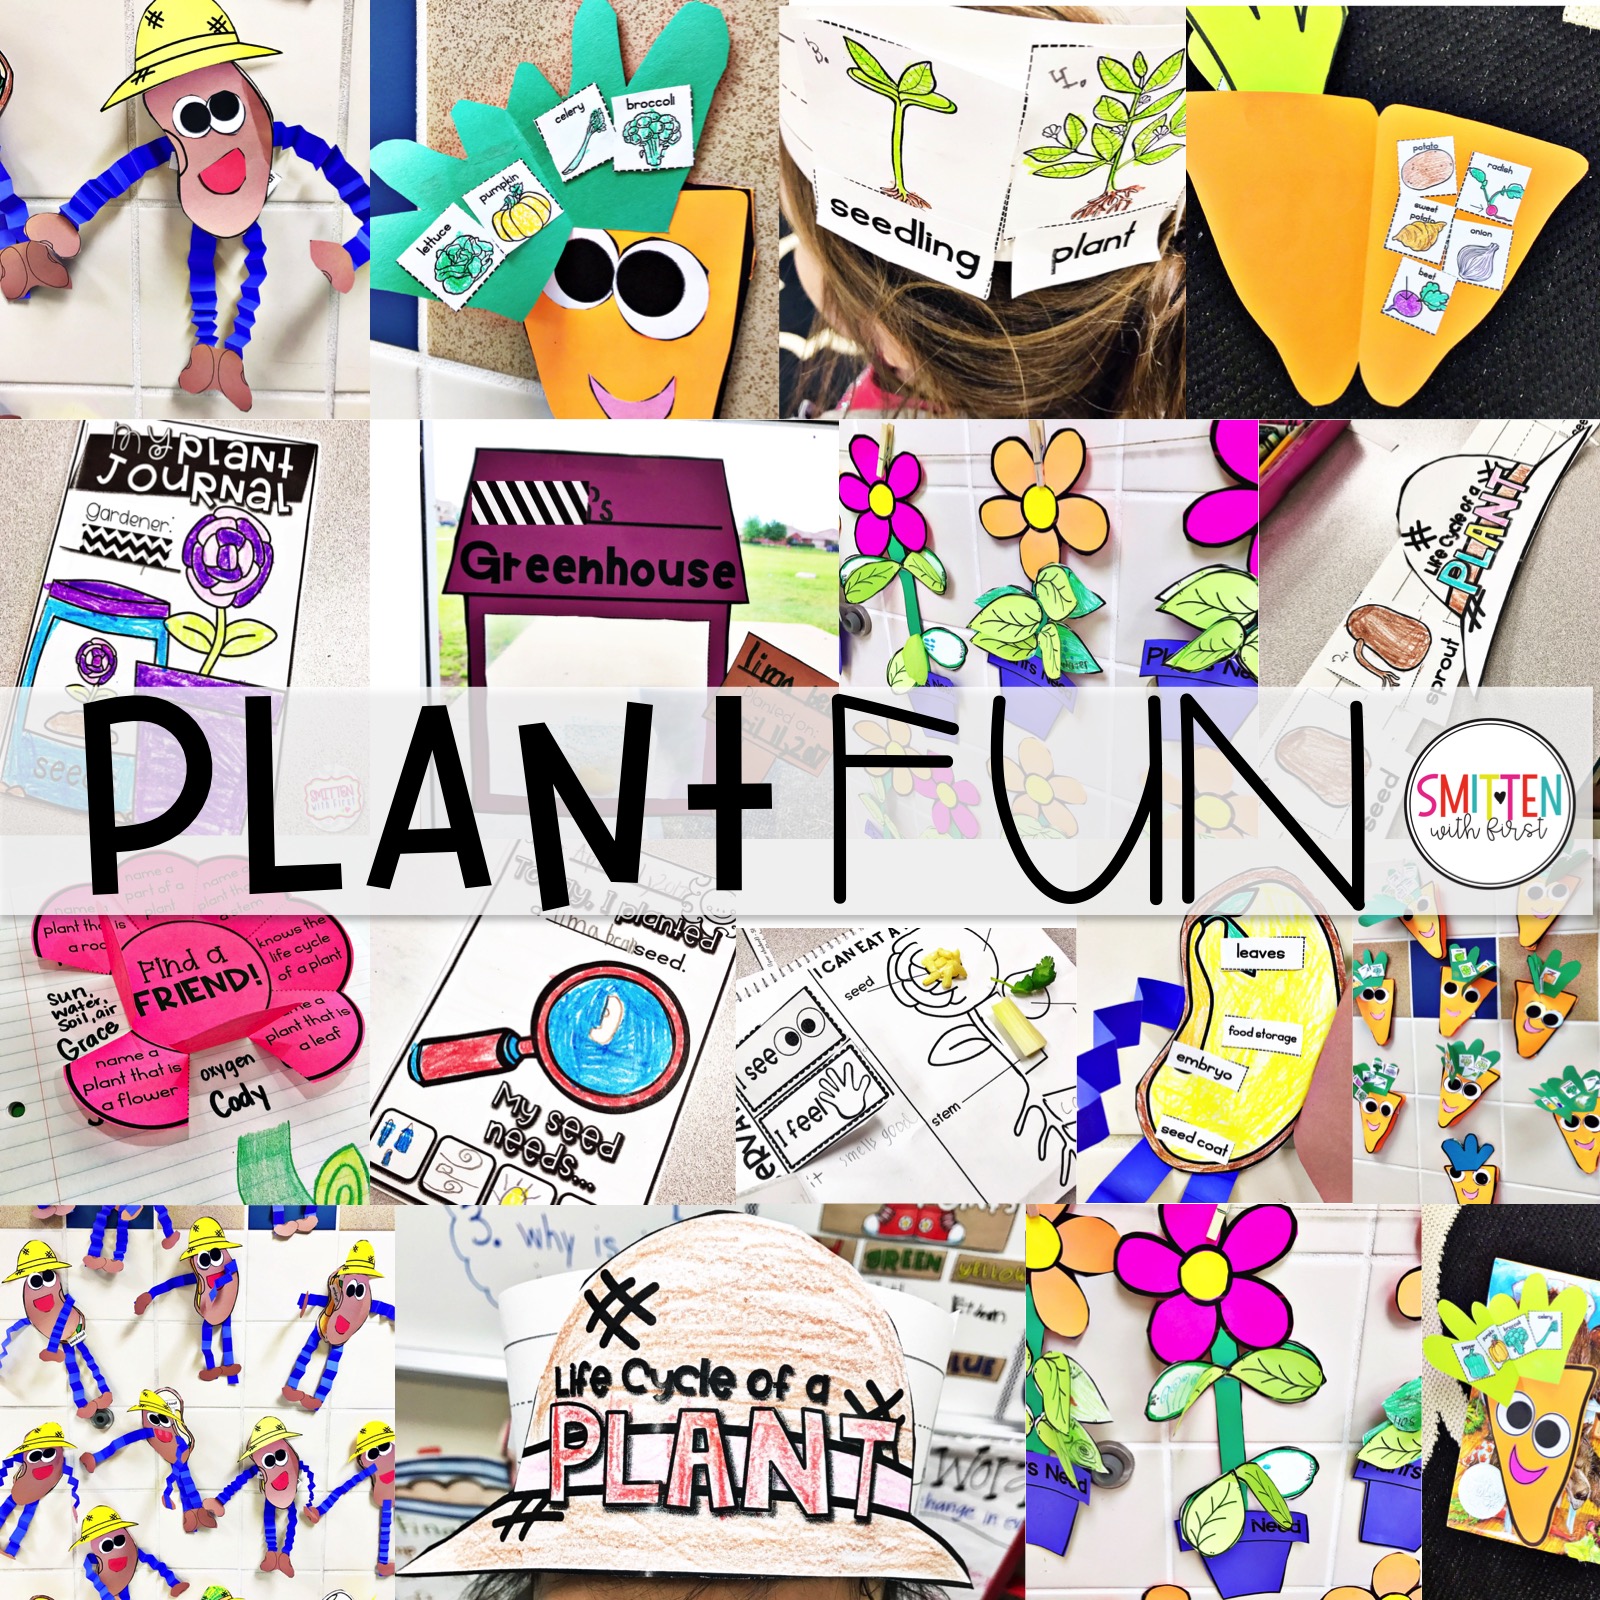 Fun Plants Activities for Plant Life Cycle Parts of Plant